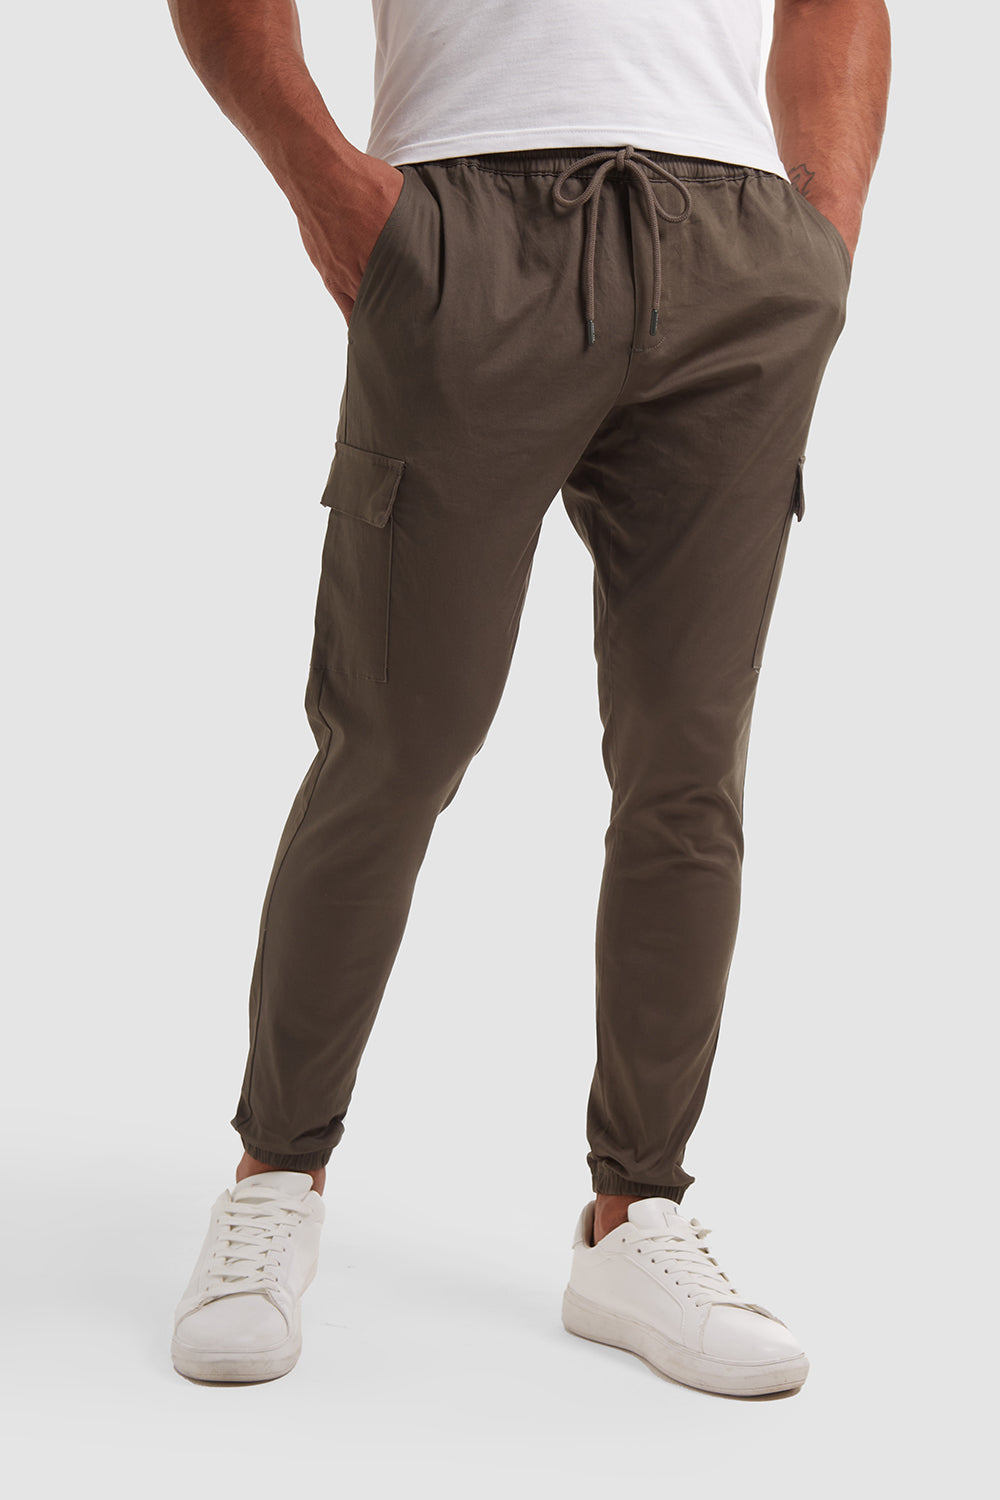 Women Casual Cargo Pants, Adults Loose Solid Color Zipper Trousers with  Pockets (Khaki) - Walmart.com